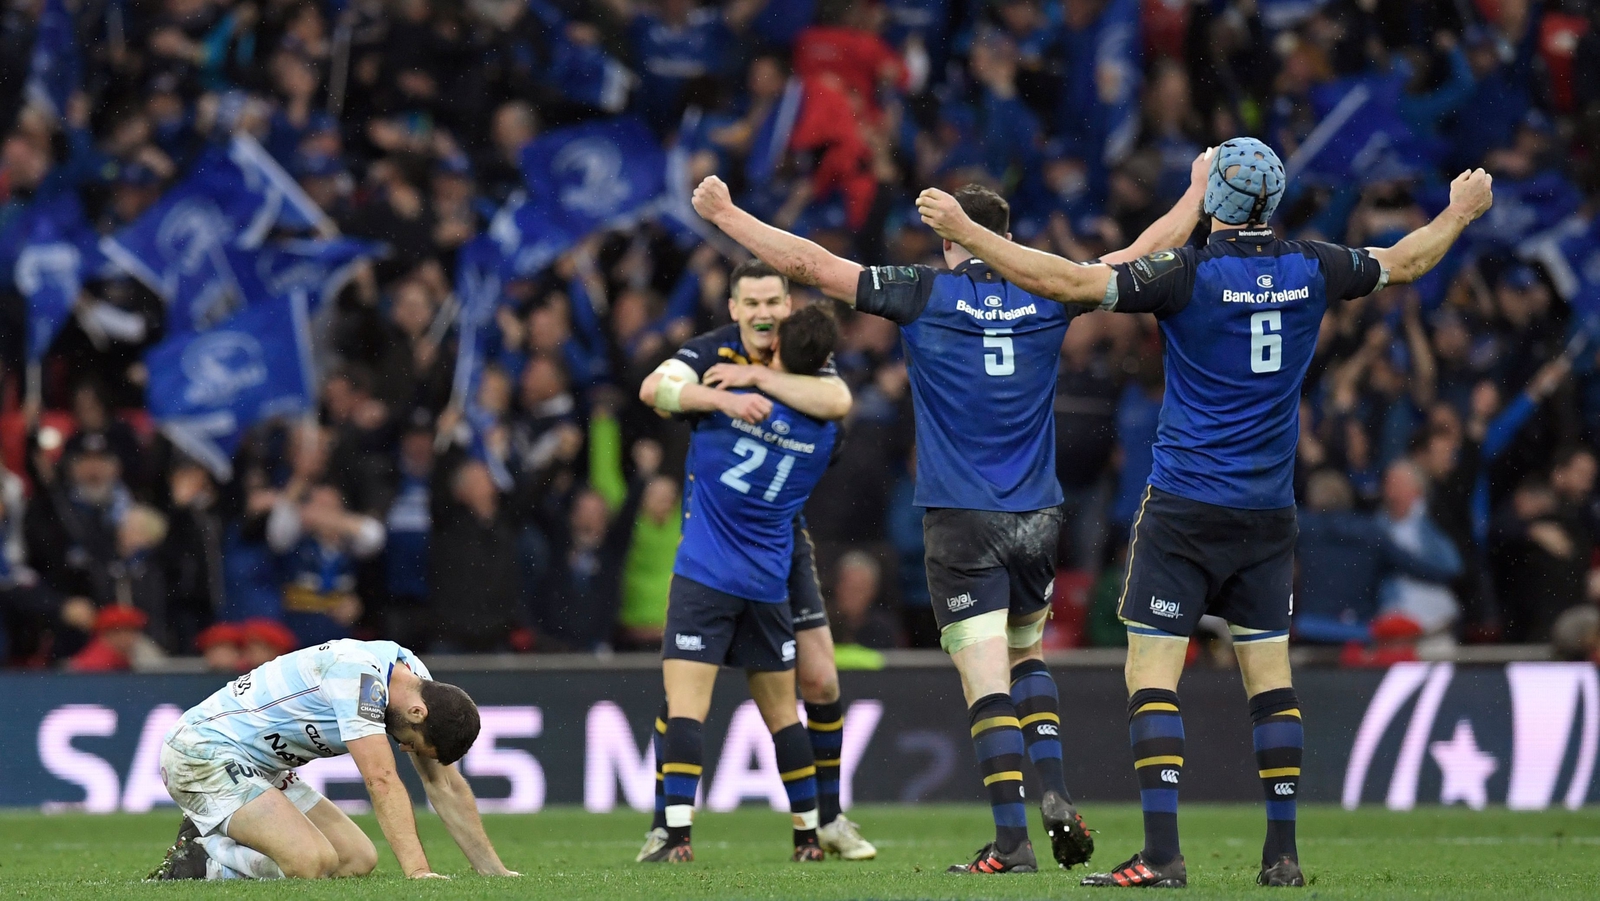 European Champions Cup 2018-19: pool-by-pool guide